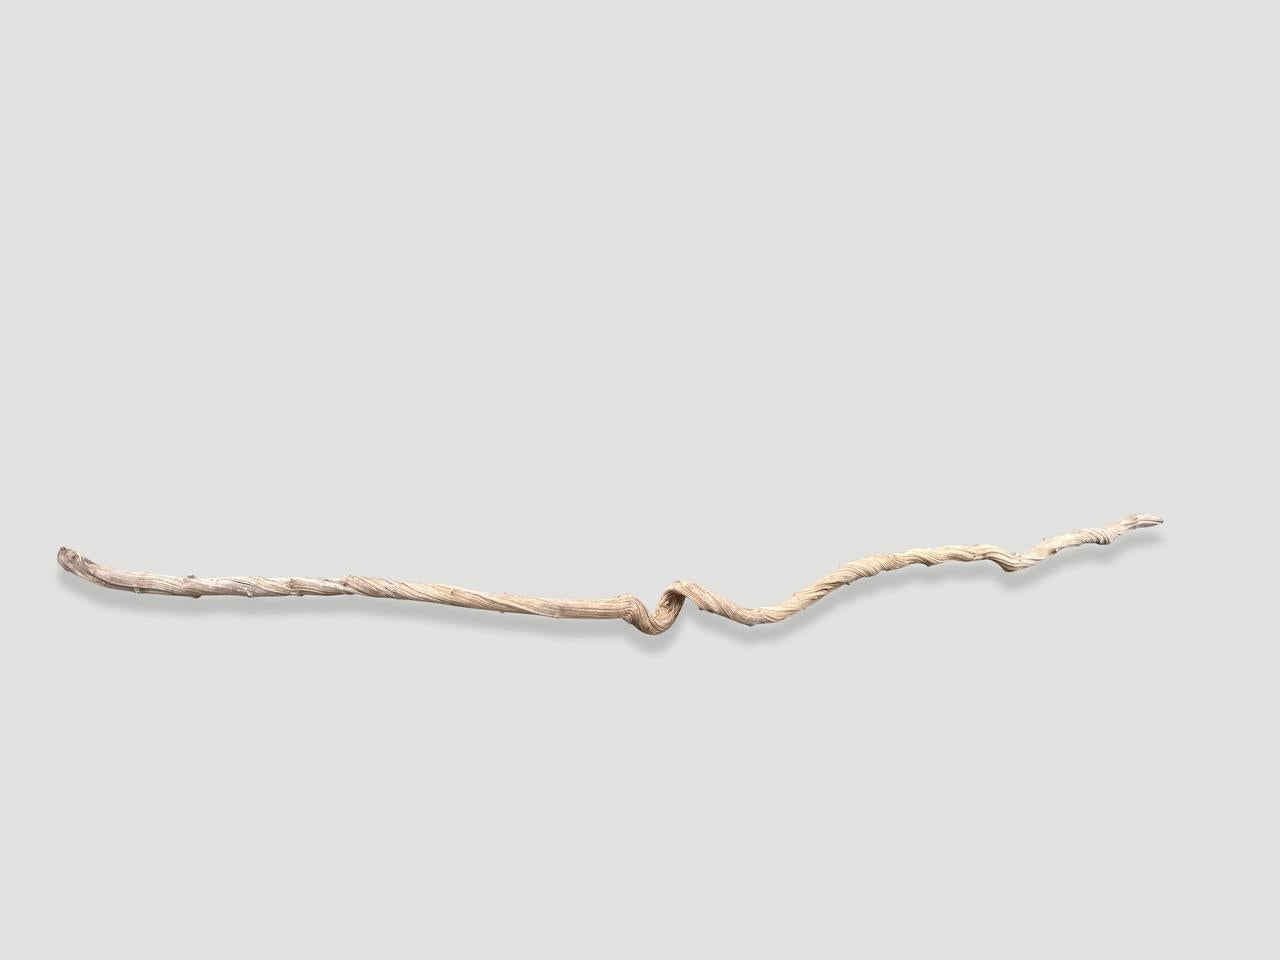 Beautiful long liana branch. Standing tall in a corner, installed as a handrail or above a bed with a textile. There are many different uses for this one of a kind sculptural piece. Sanded and bleached revealing the stunning wood grain. It’s all in